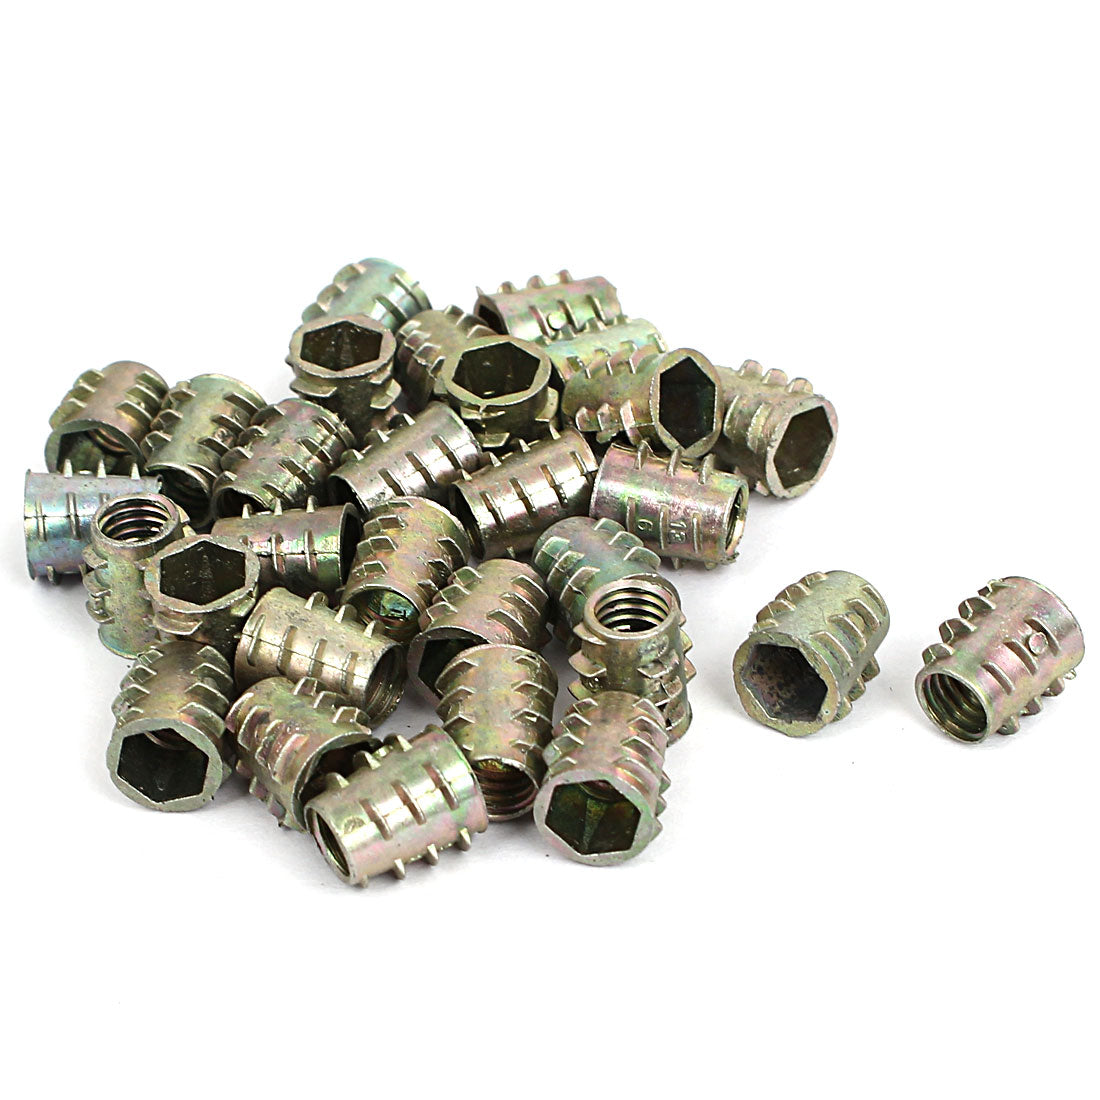 uxcell Uxcell M6x10mm Zinc Plated Hex Socket Screw in Thread Insert Nut 30pcs for Wood